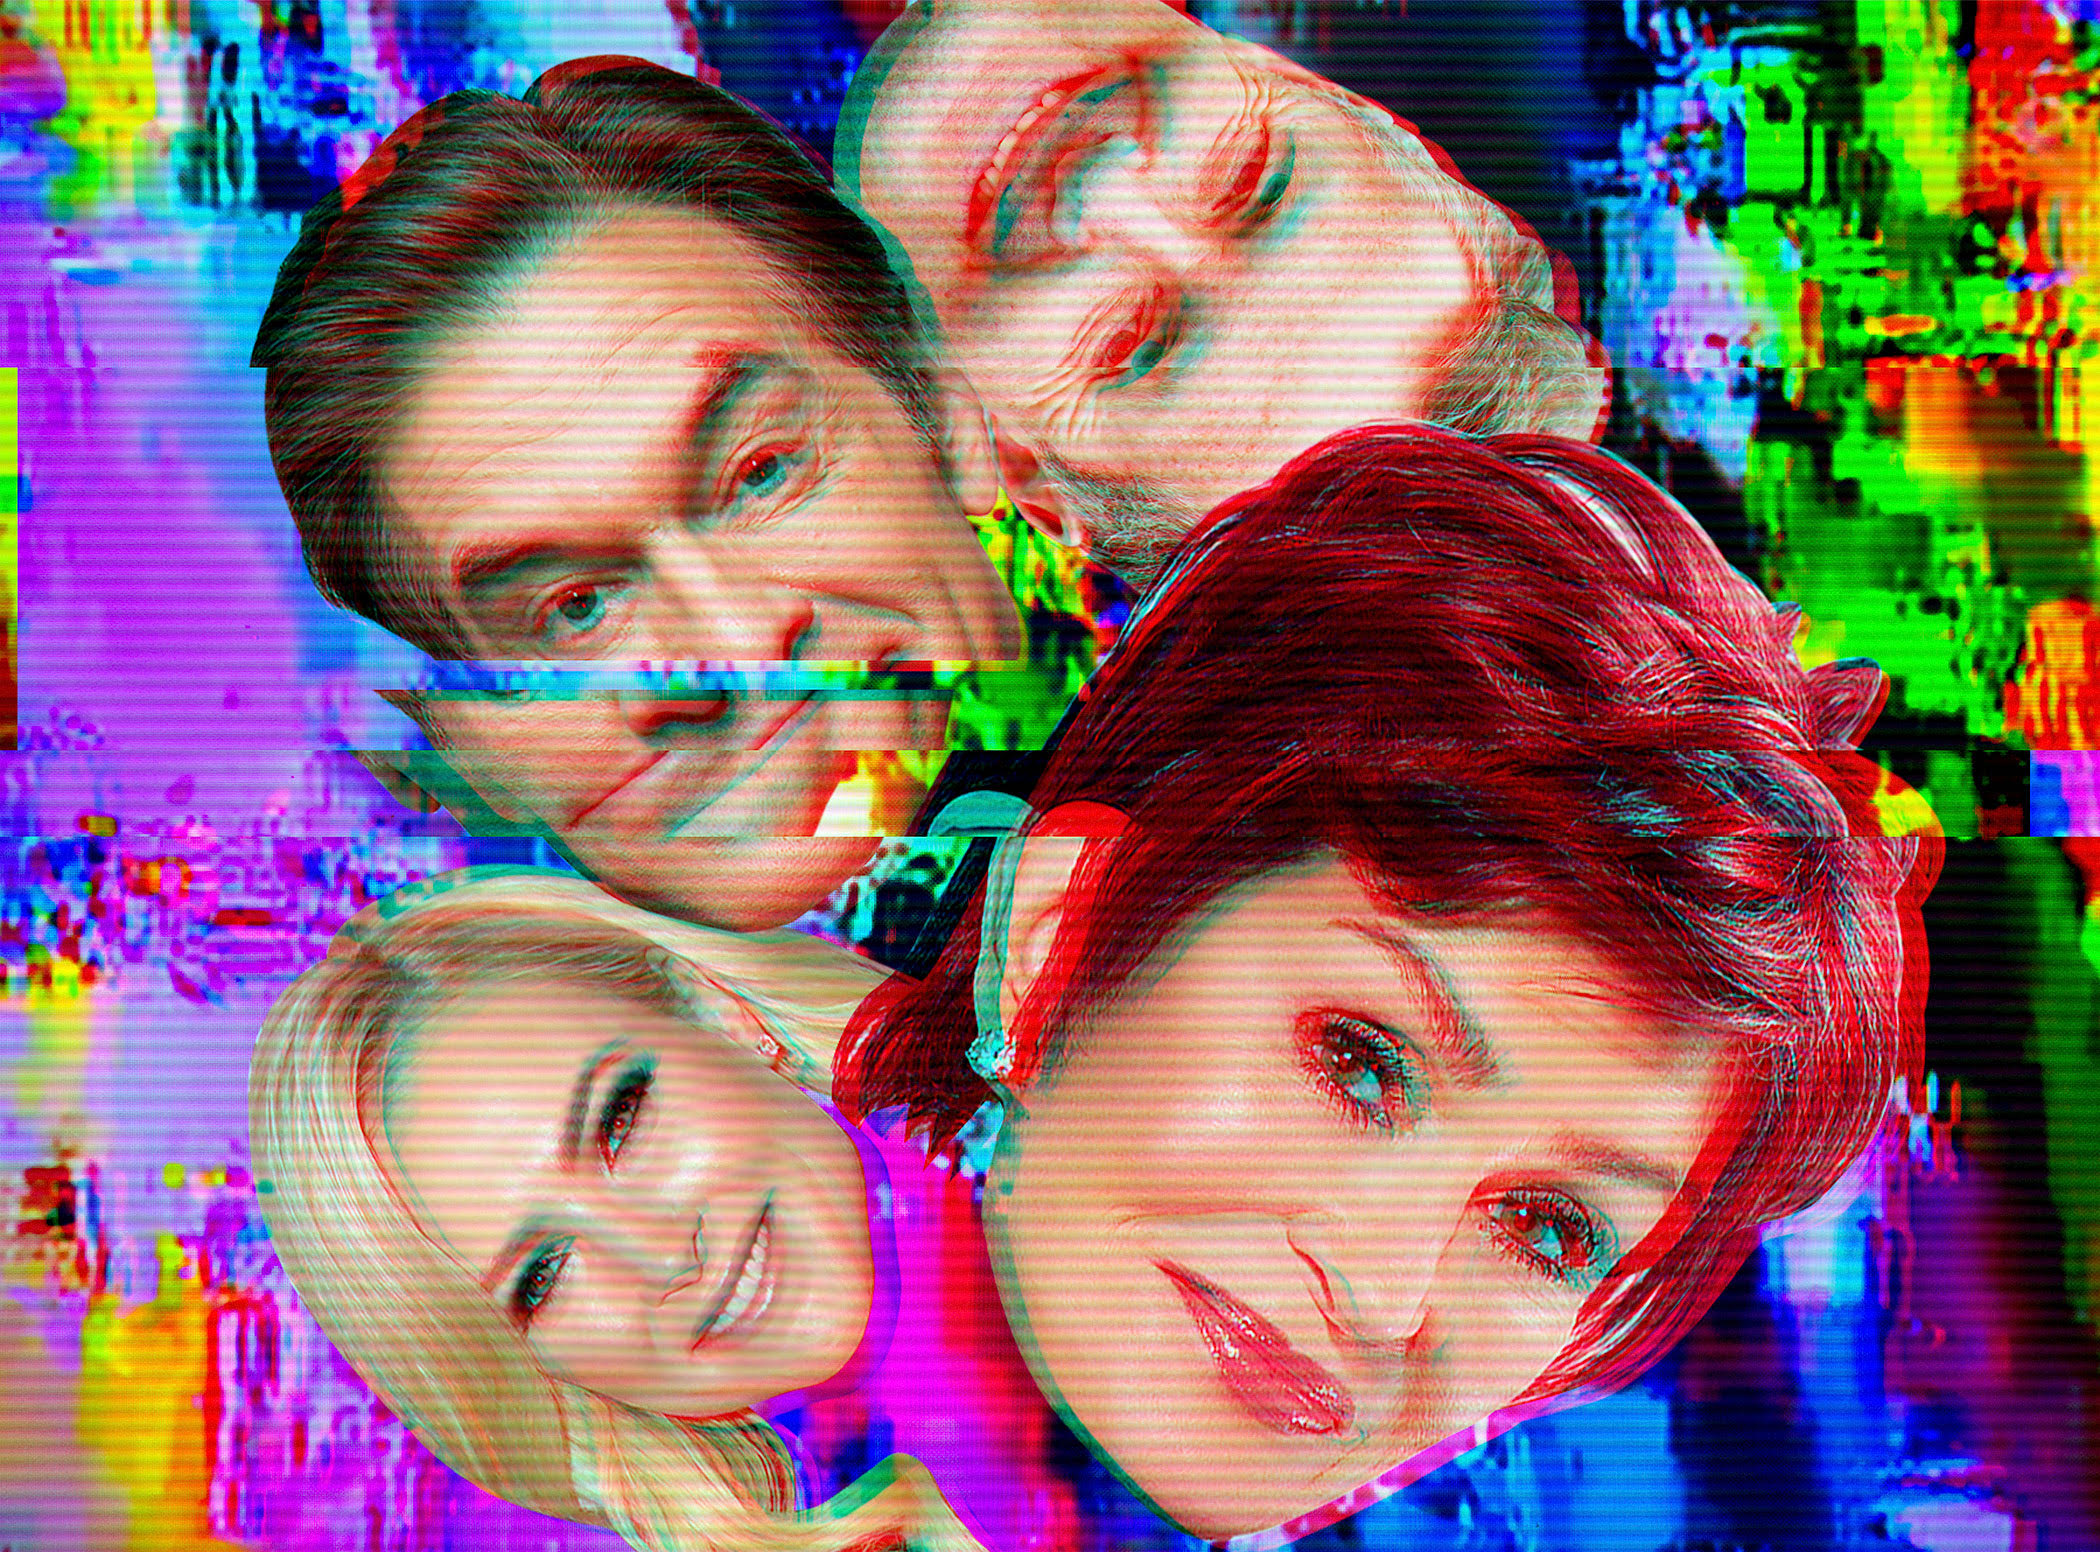 Clockwise from left: Dr. Oz, Piers Morgan, Sharon Osbourne and Meghan McCain (Illustration by Alvaro Dominguez for TIME; Source Photos: Getty Images (5))